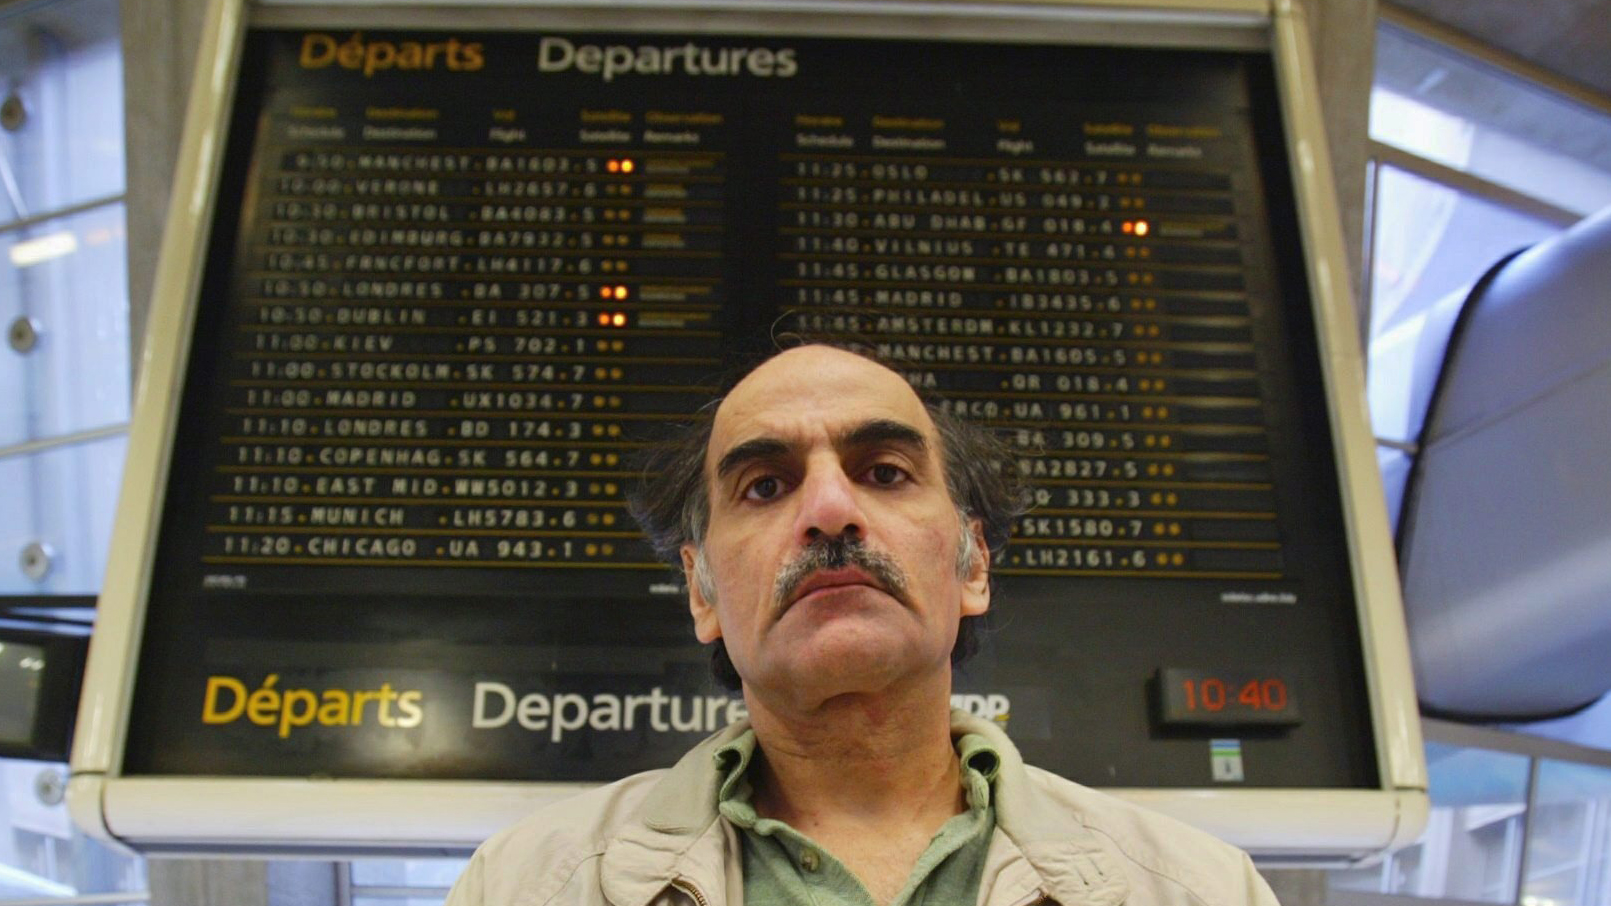 Man who inspired 'The Terminal' movie dies in Paris airport - National